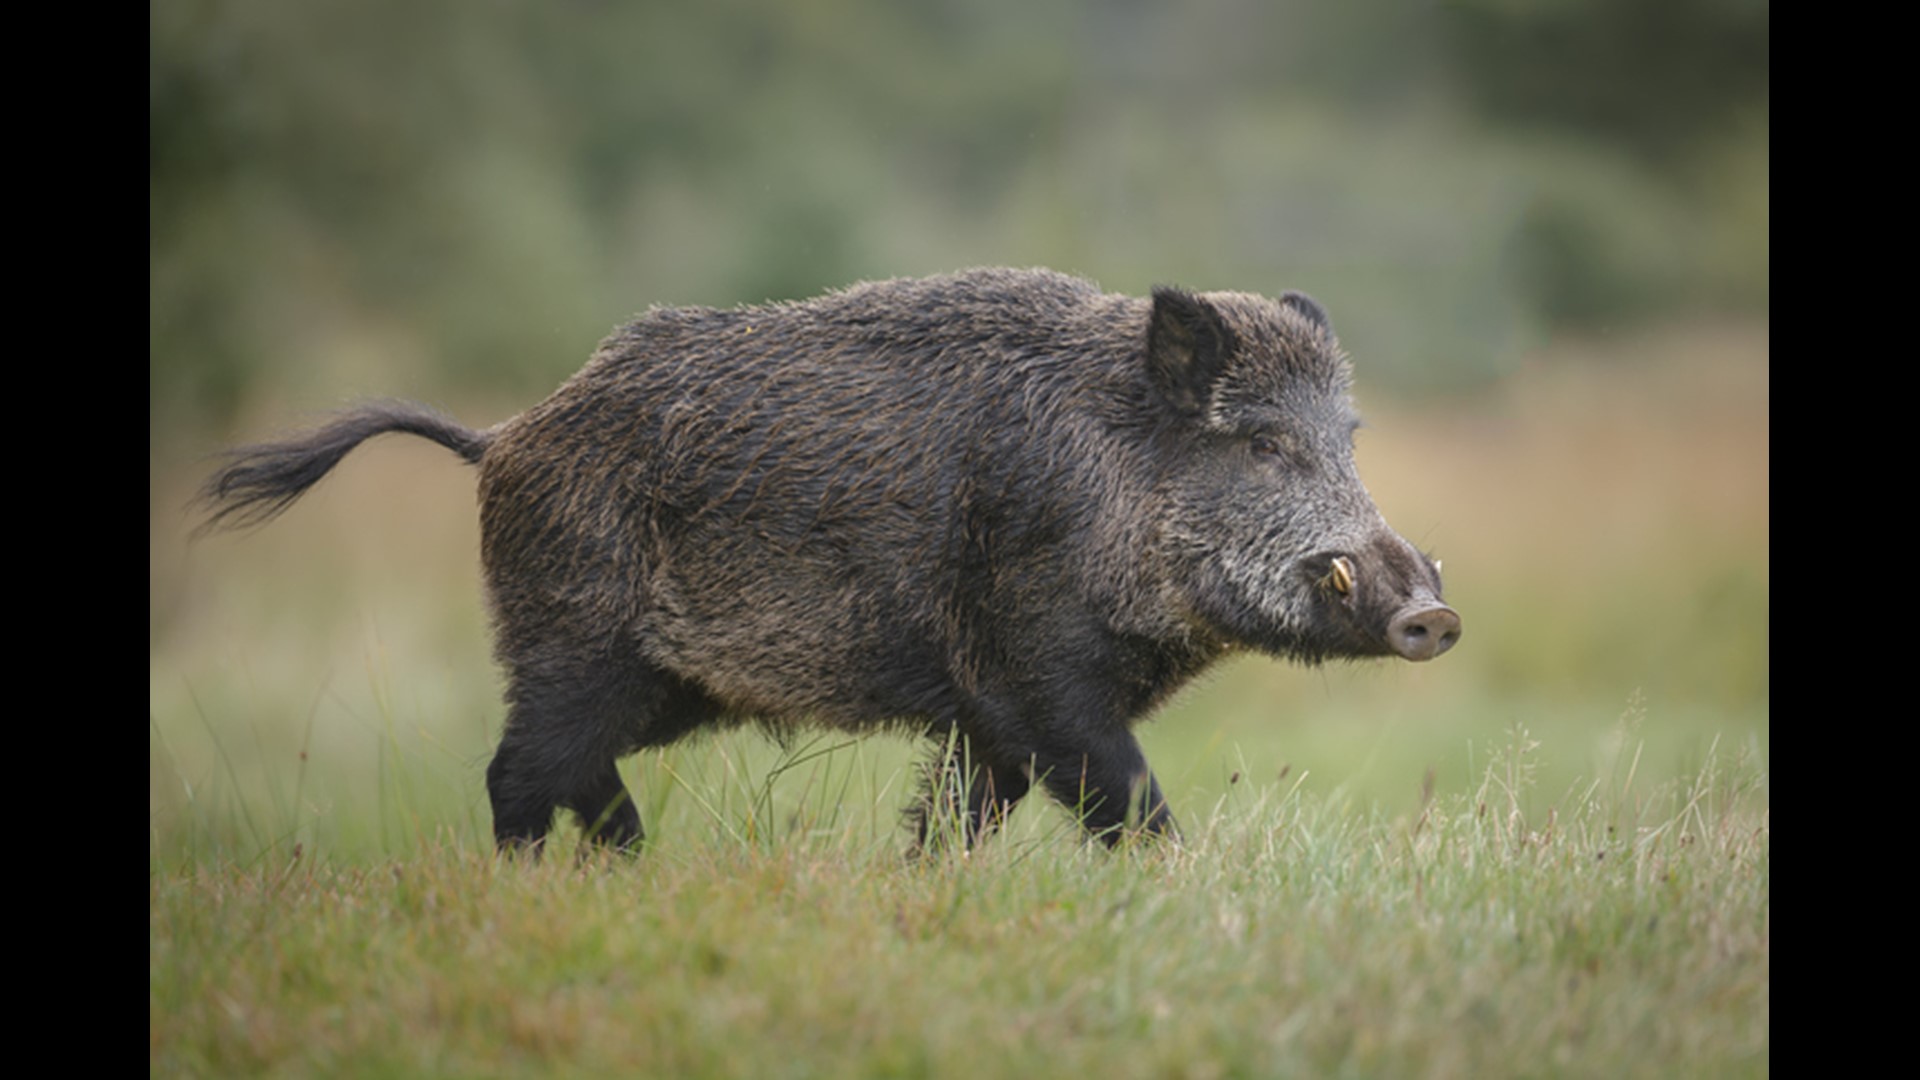 The big boar had been terrorizing the family and their pet pot belly pigs for weeks. So they called Ortiz Game Management to set up a hog trap.